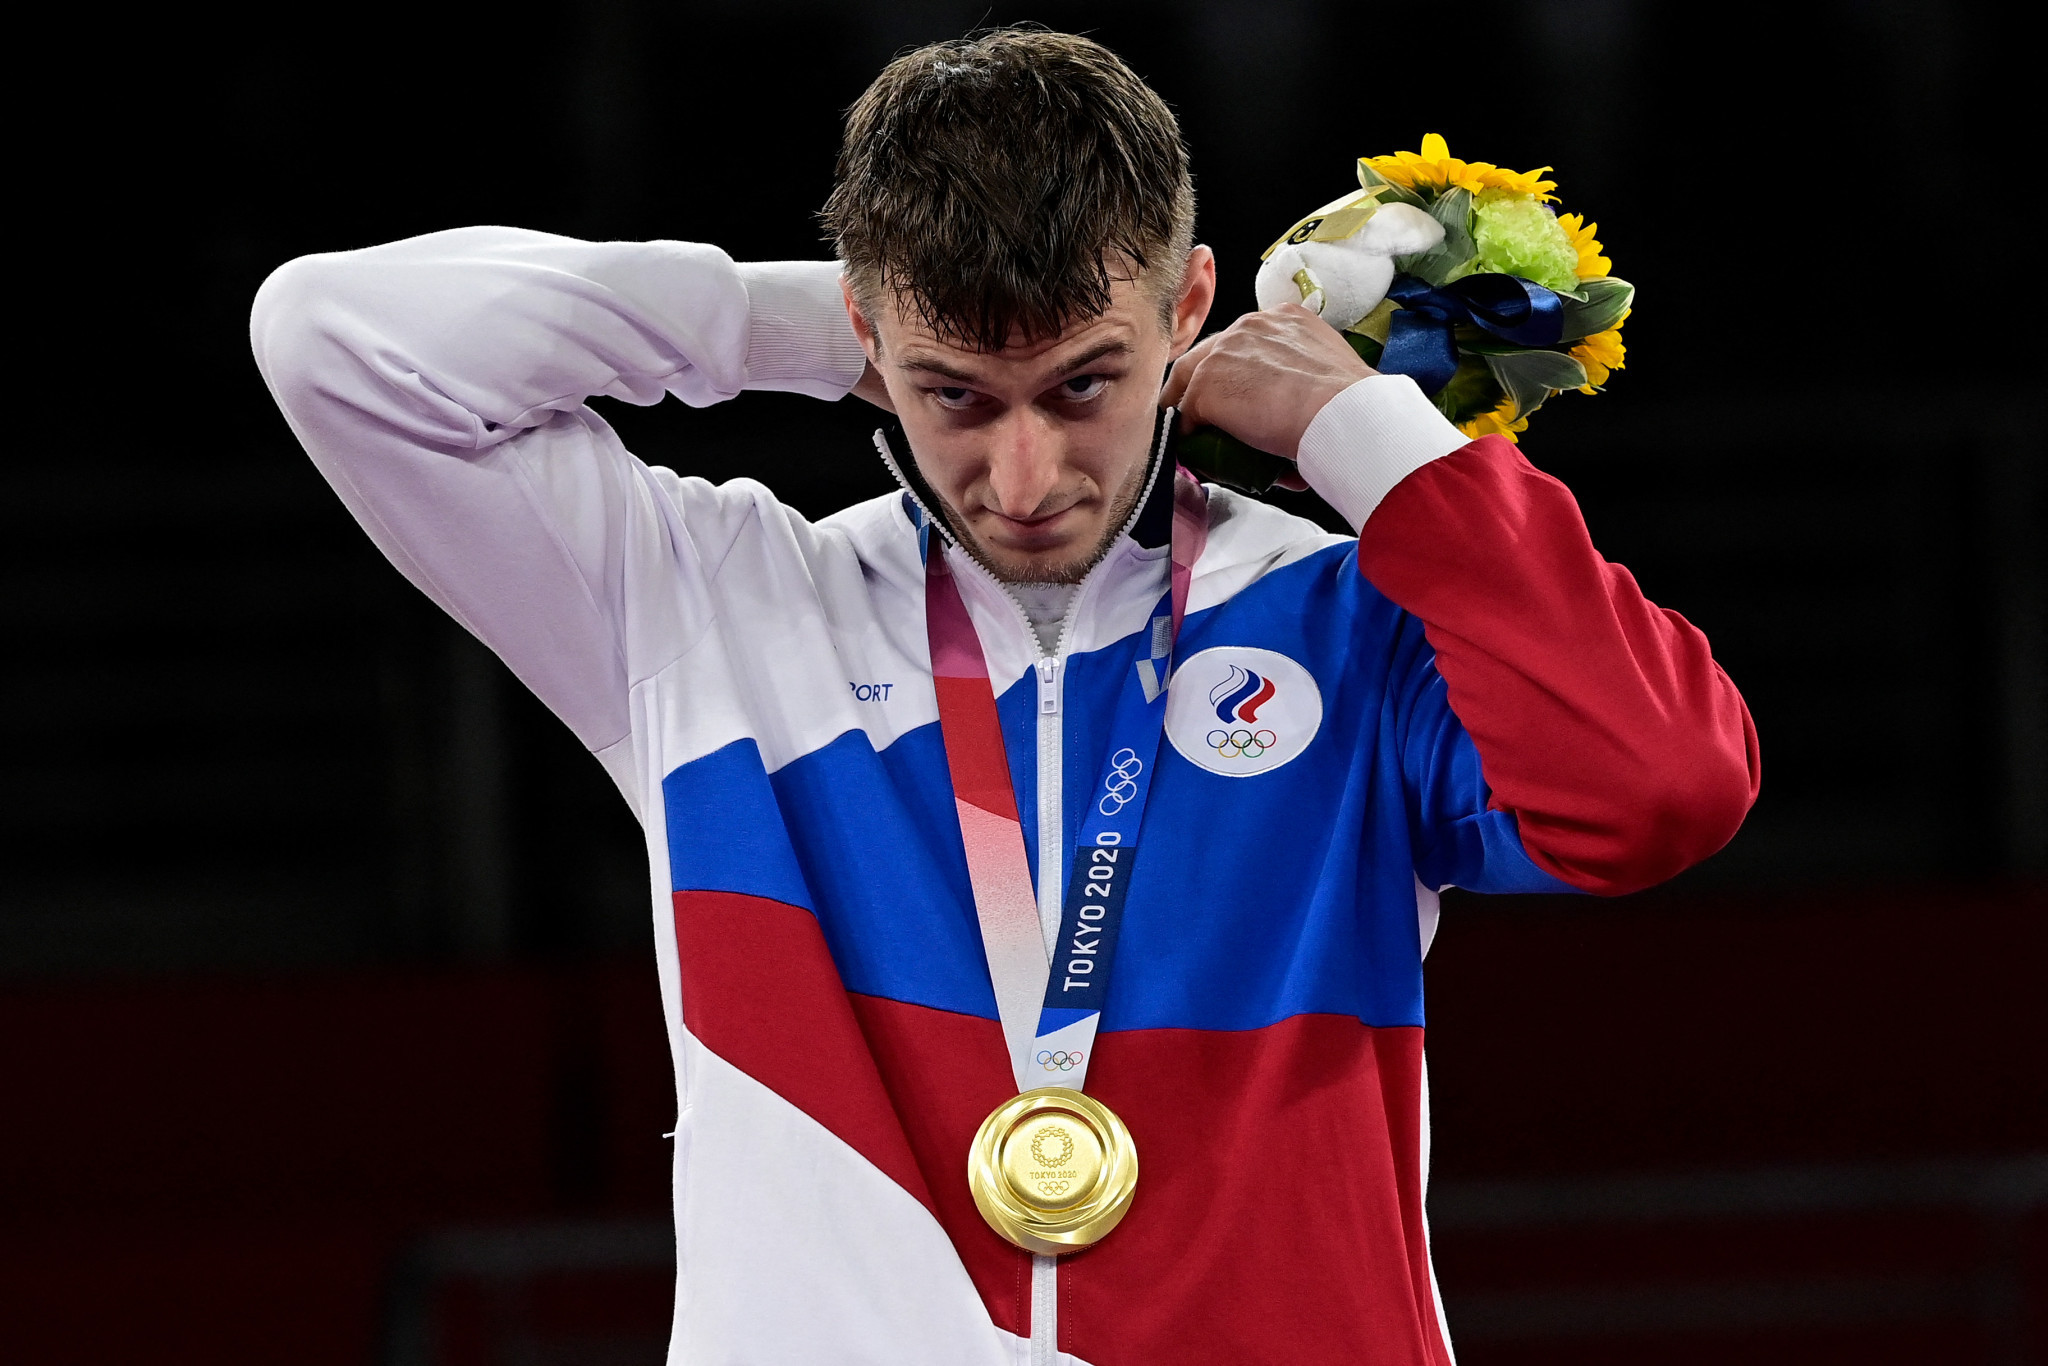 Exclusive: World Taekwondo launch probe after banned Russians described as "part of the team" at World Championships